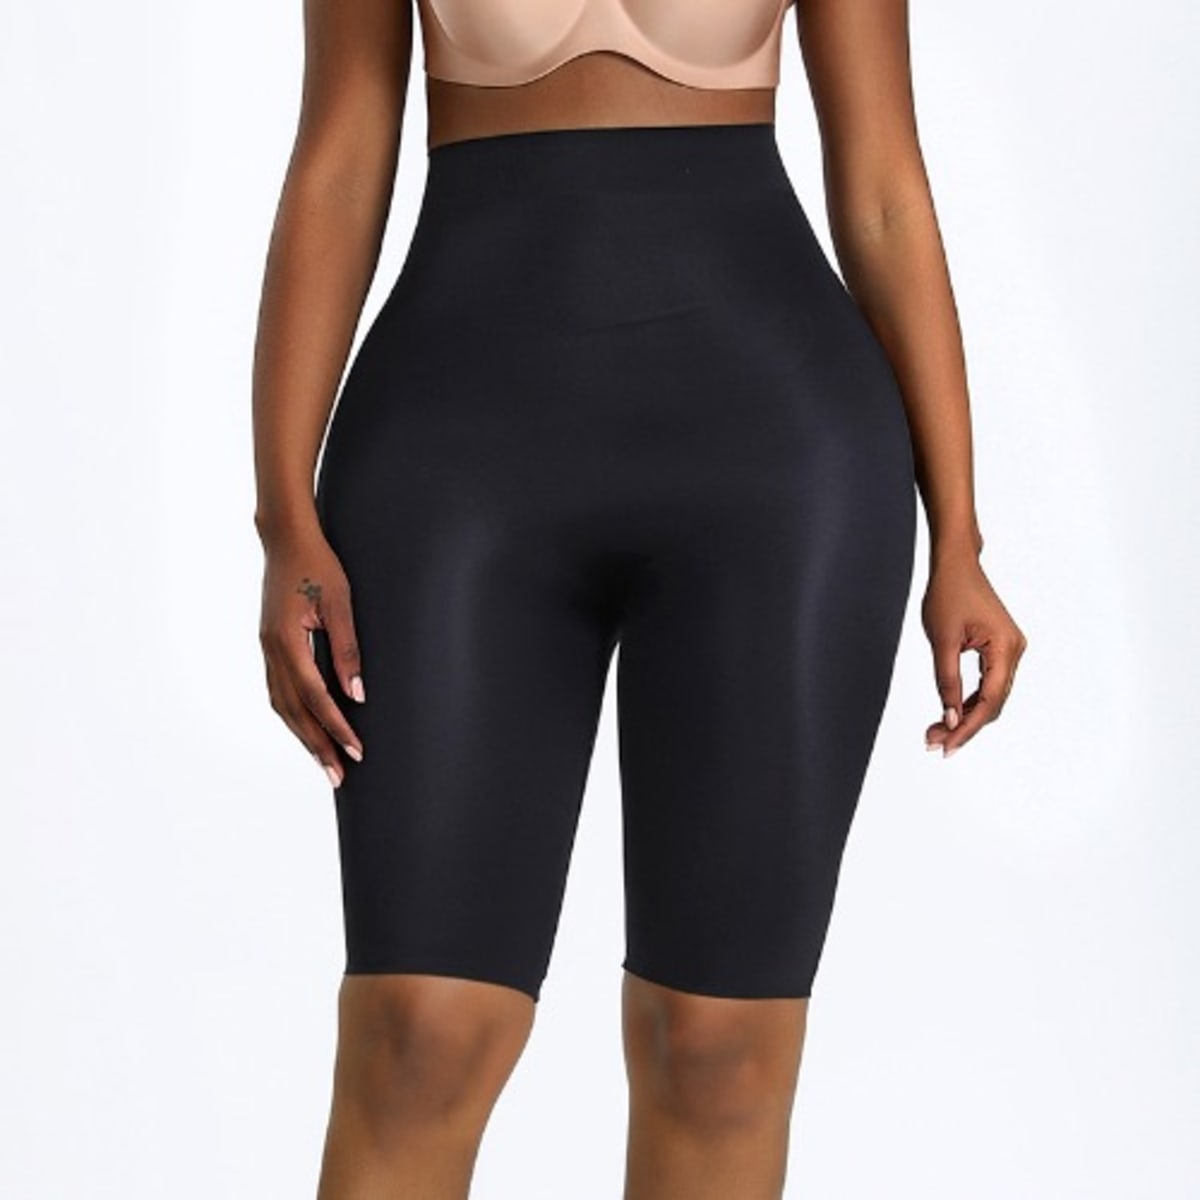 Seamless Padded Butt With Tummy Control Girdle - Black